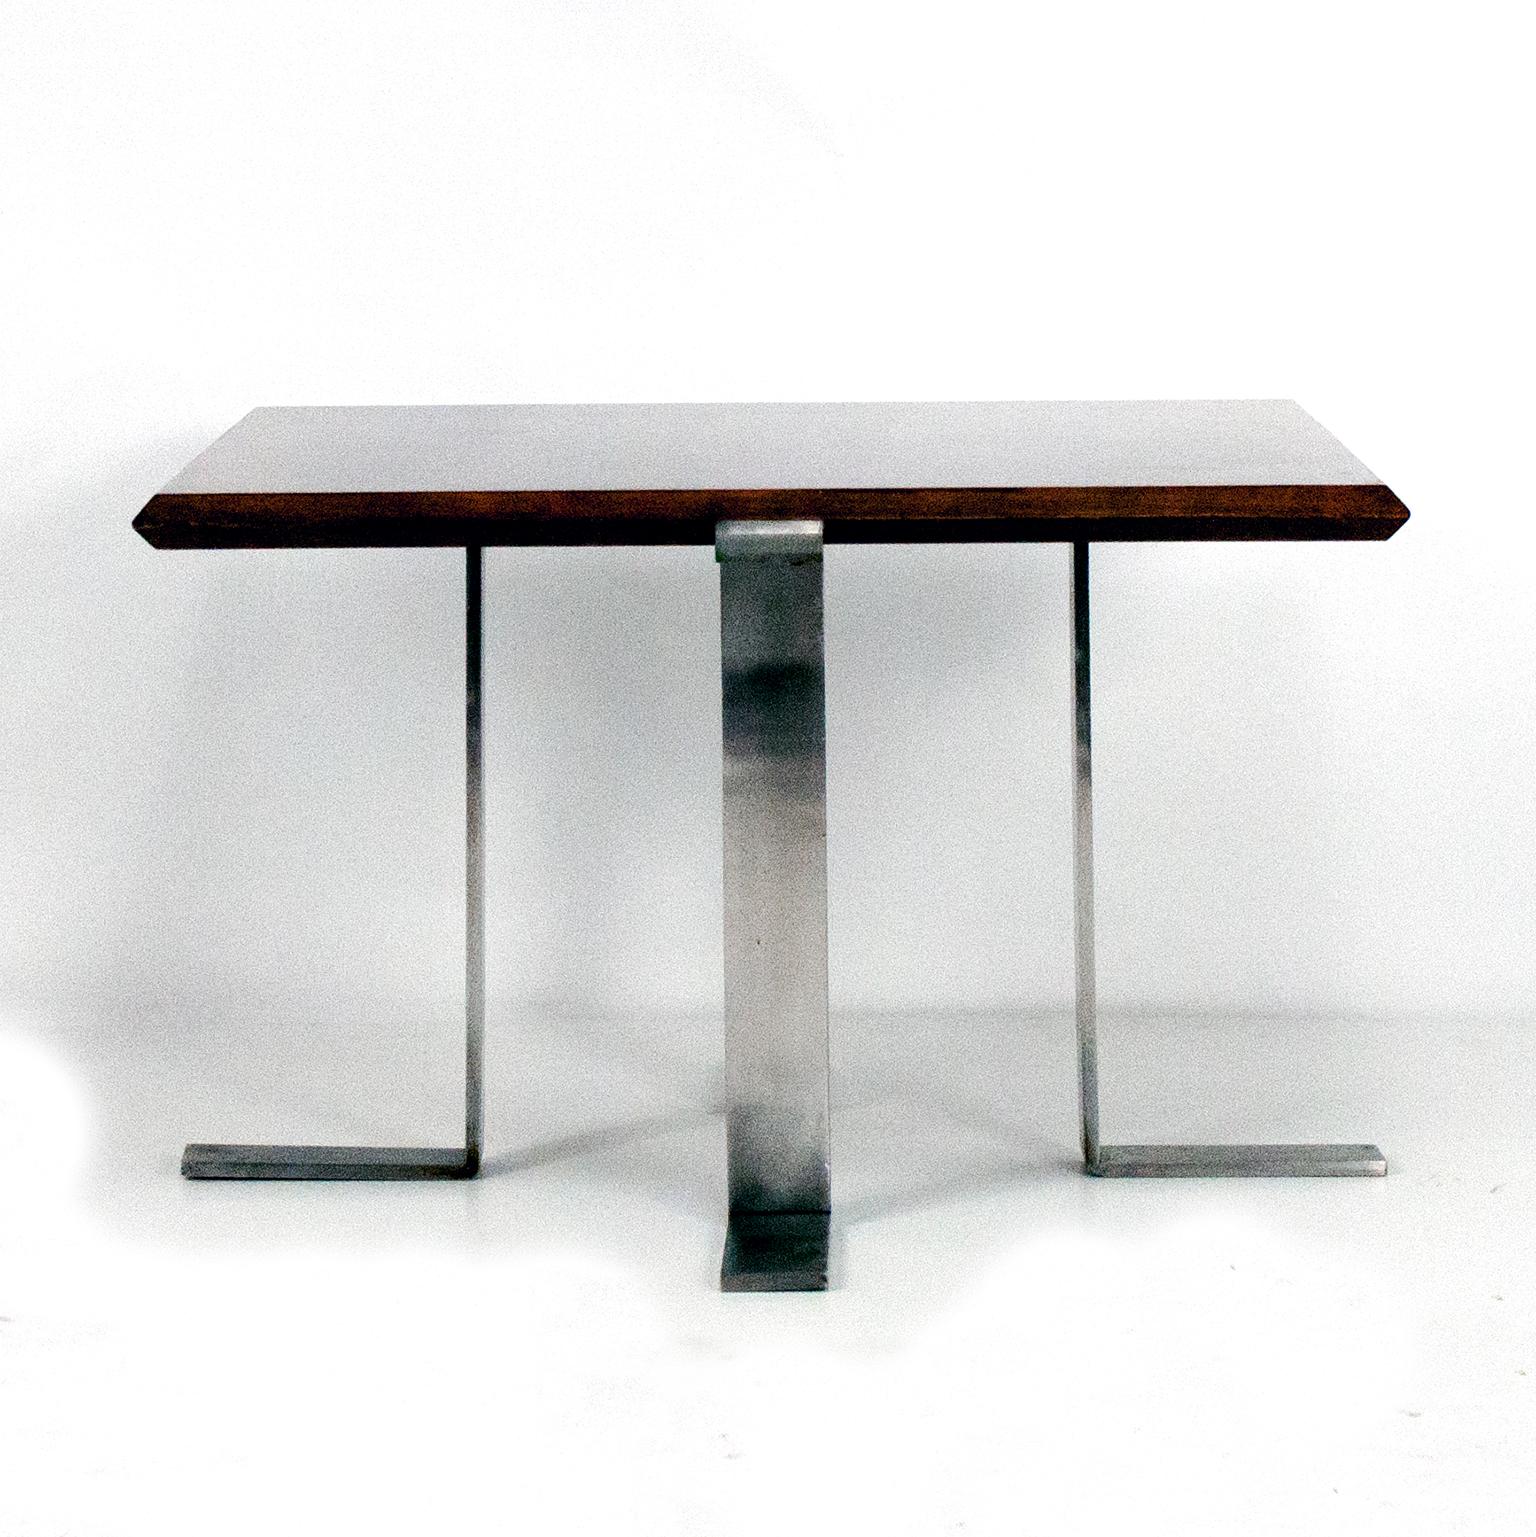 Square side table. Structure in nickel-plated solid brass feet. Stained and polished walnut Veneer. Top. Designed by Jordi Vilanova in 1970s.

   
  